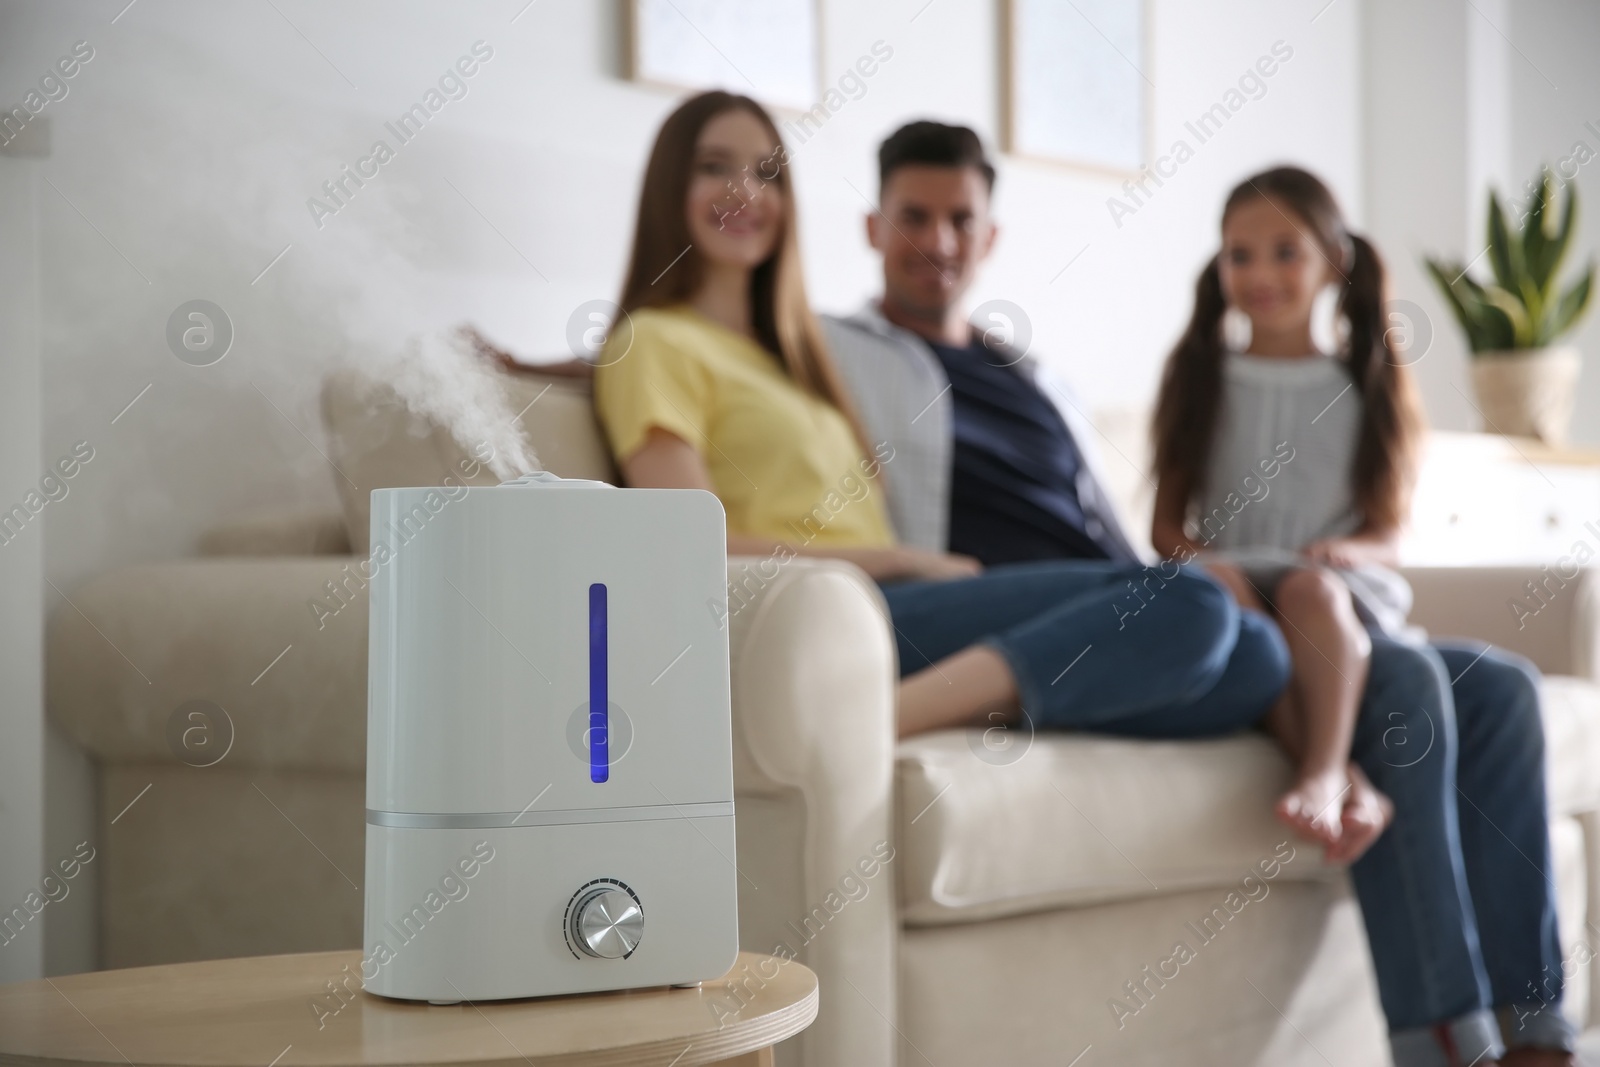 Photo of Modern air humidifier and blurred family on background